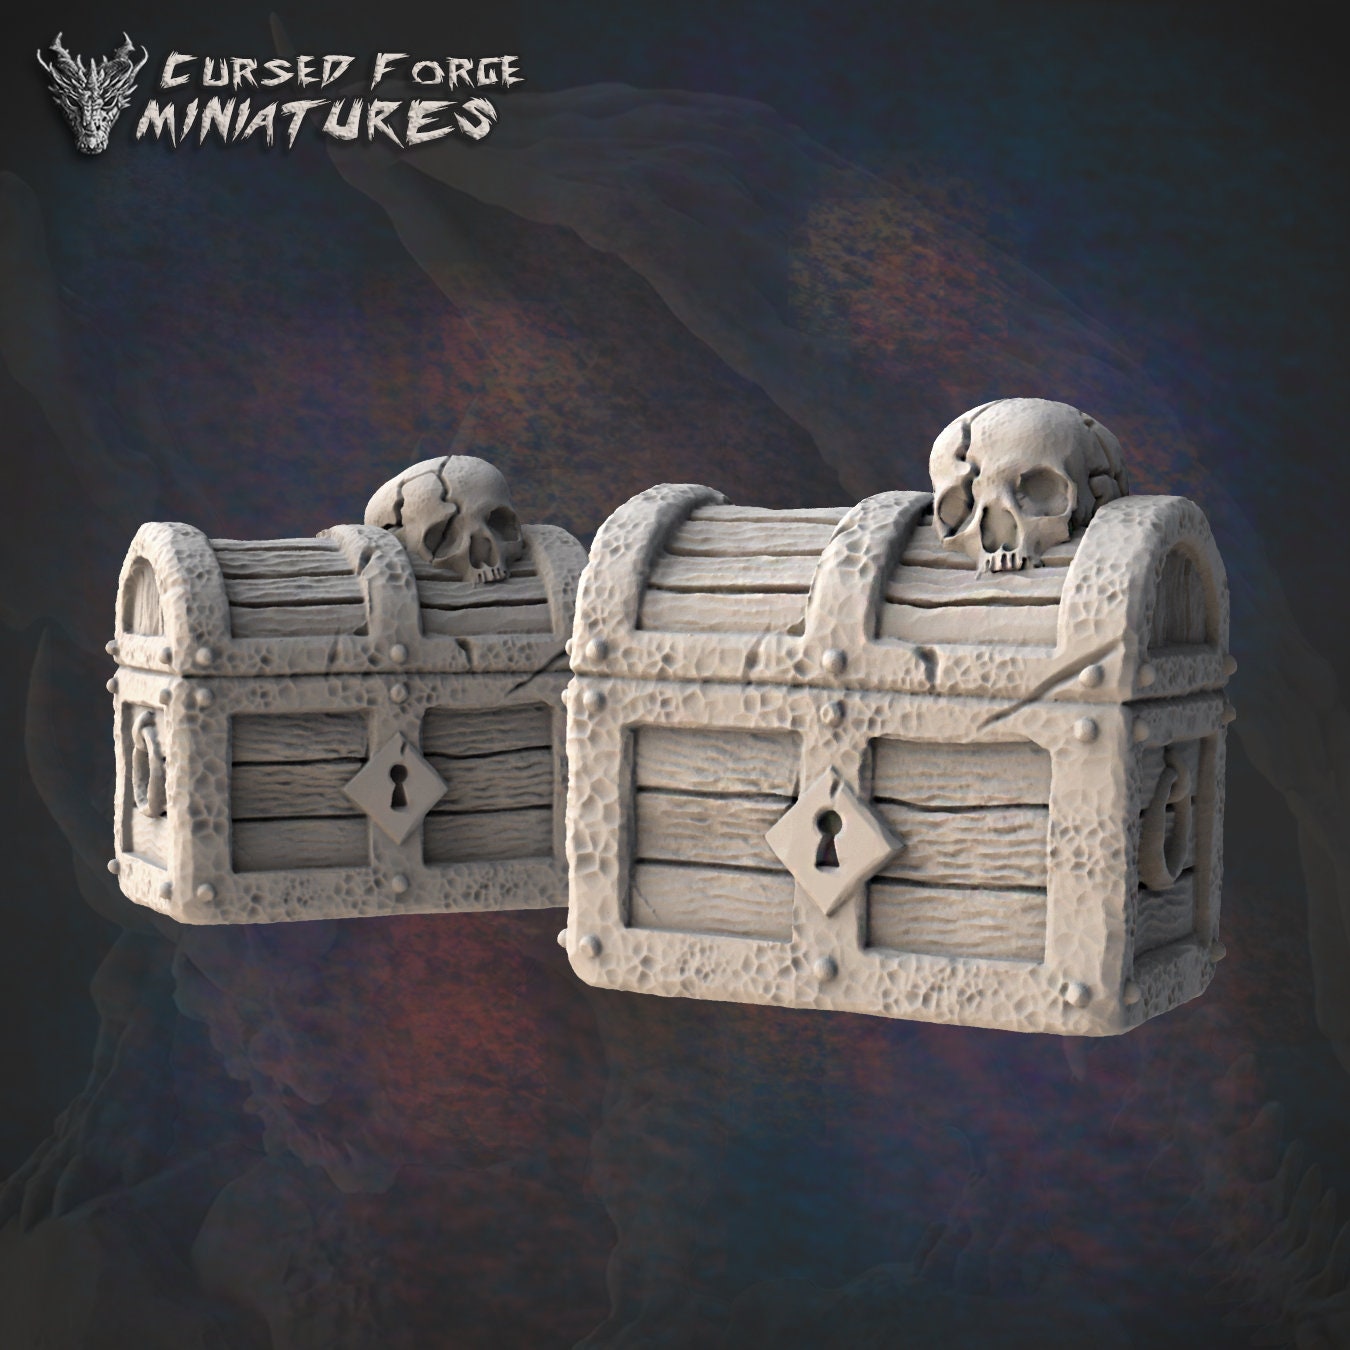 SKULL CHEST, by Cursed Forge Miniatures // 3D Print on Demand / D&D / Pathfinder / RPG